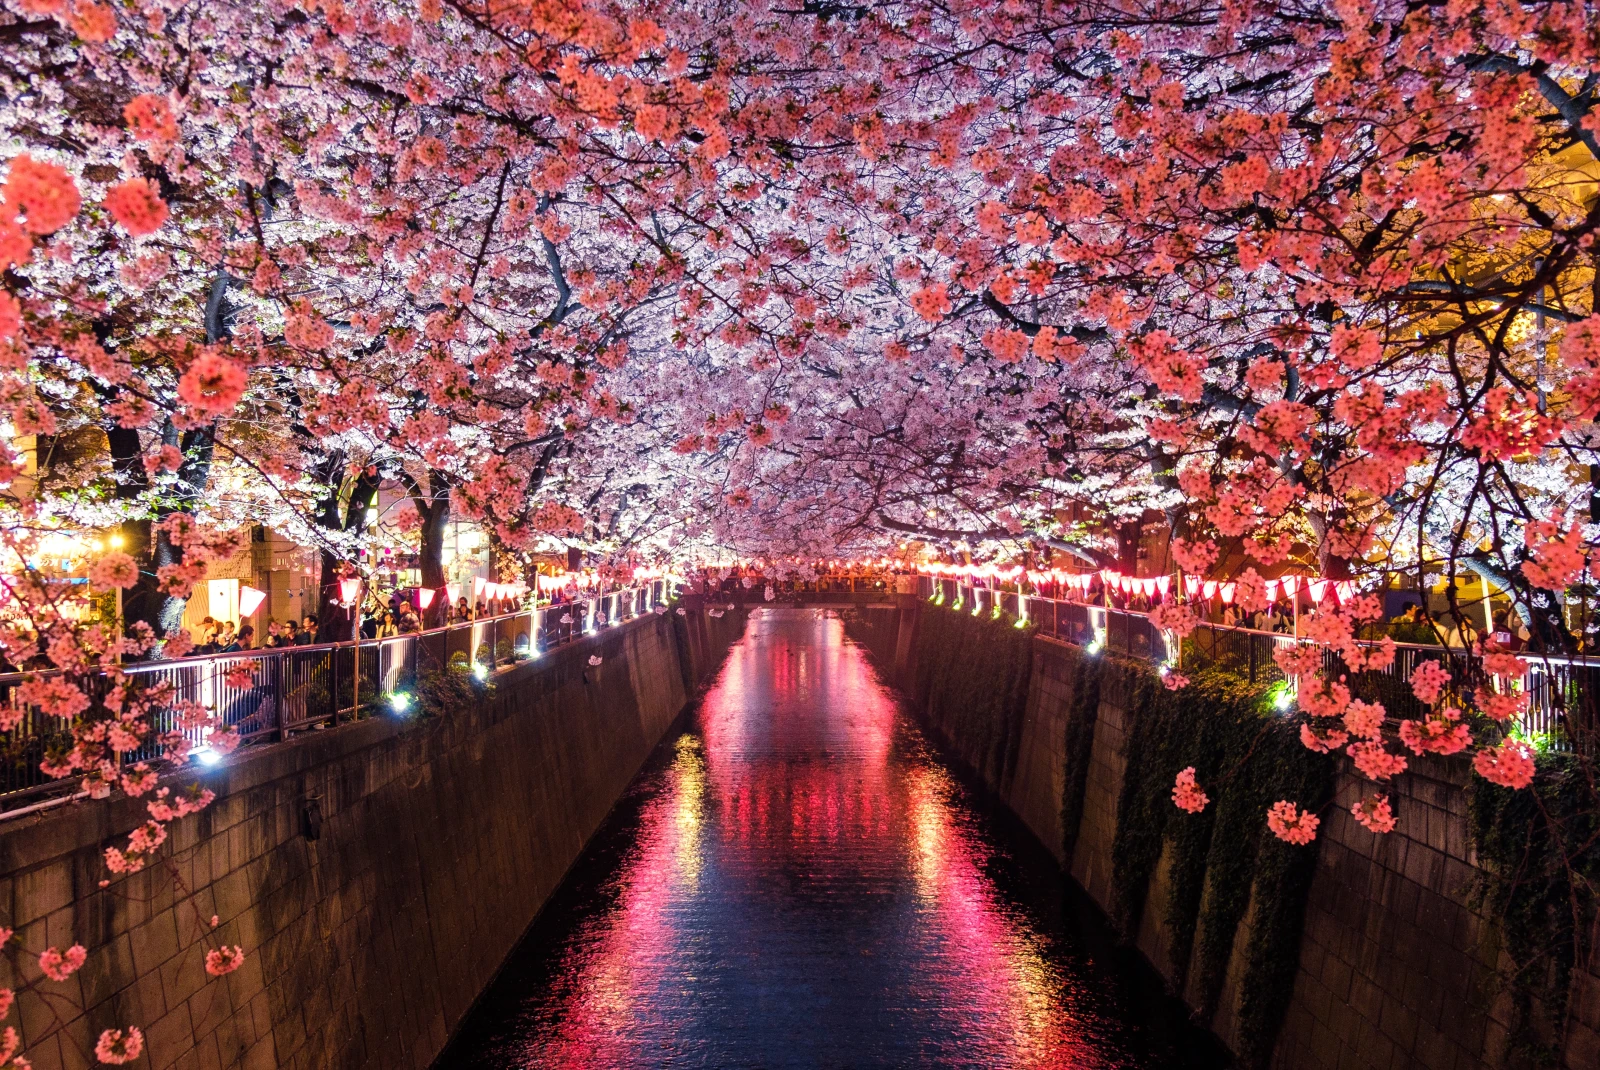 A canal between cherry blossom trees.